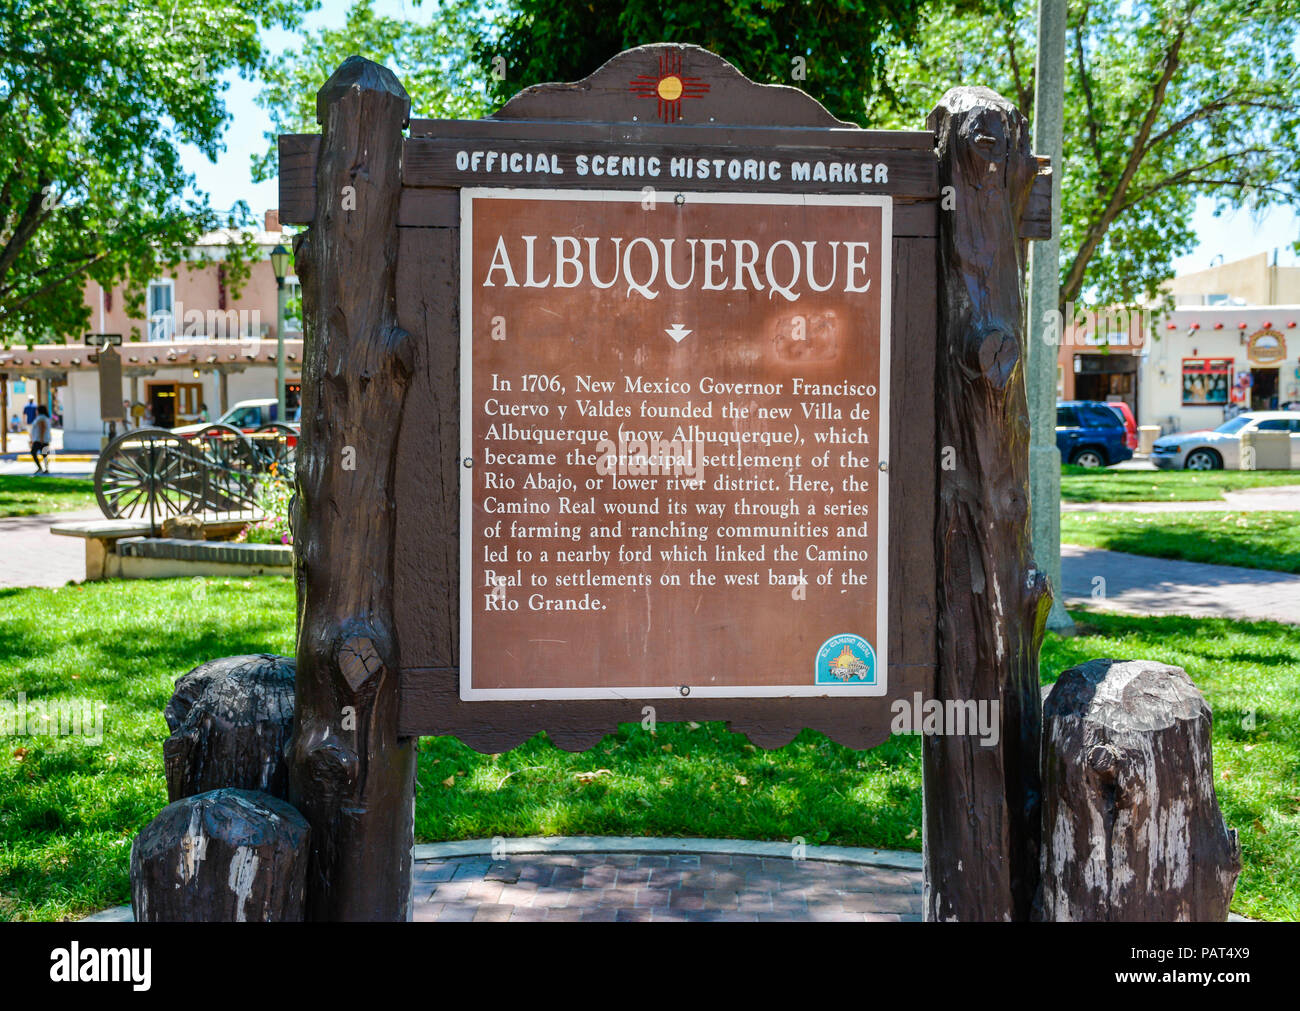 An official scenic historic marker on the square in old town Albuquerque commemorating the founding of Albuqurque, NM Stock Photo